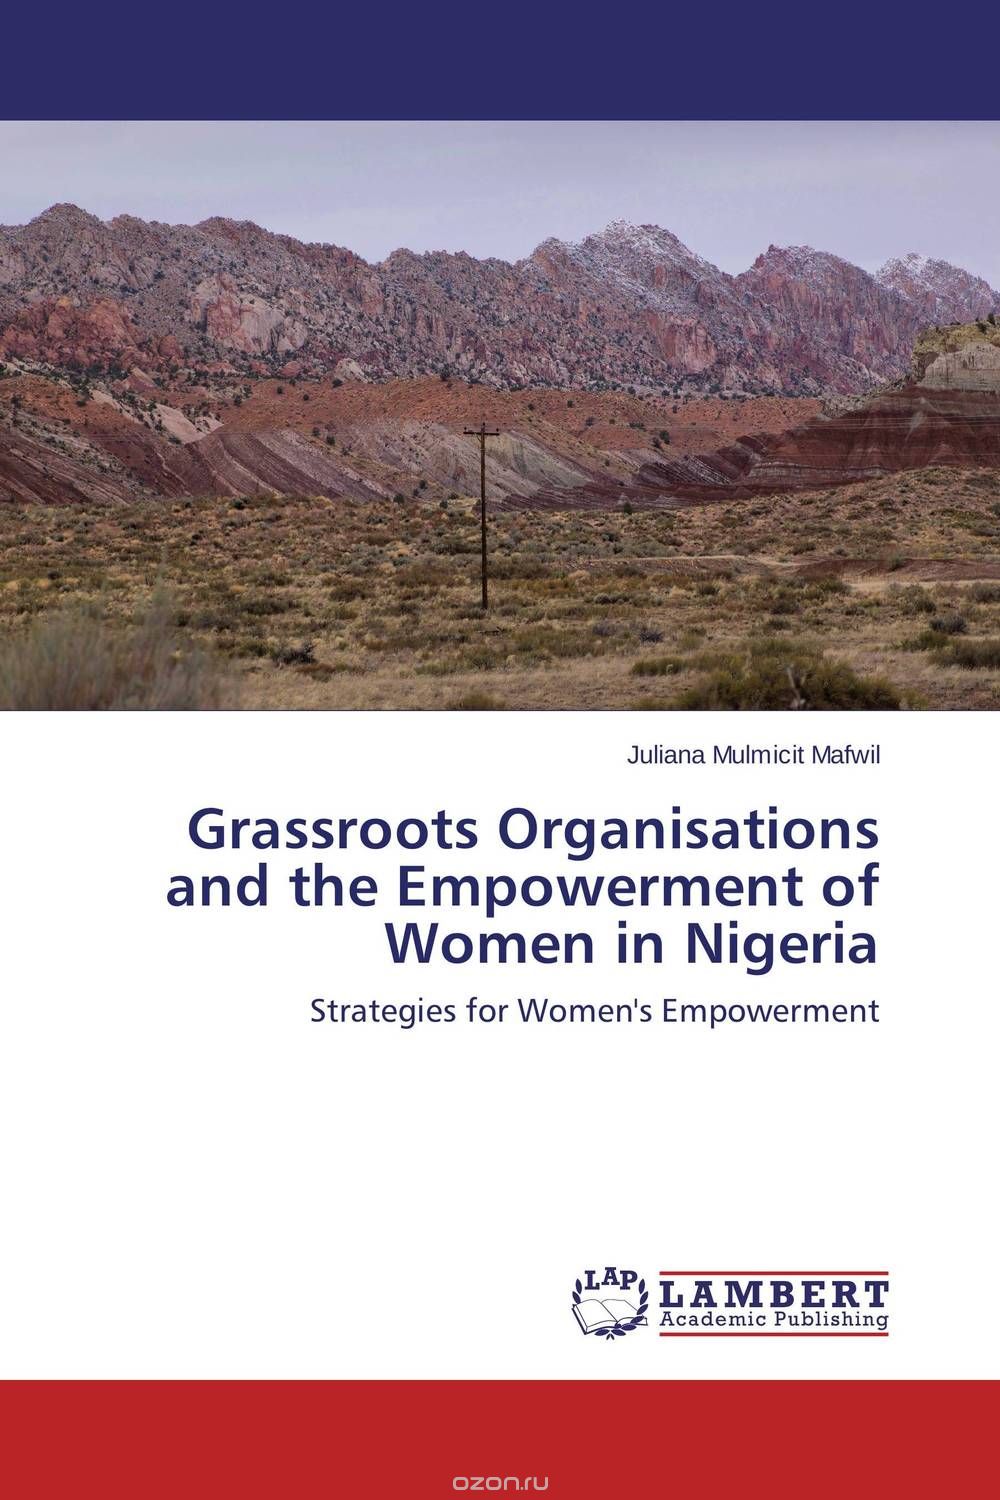 Grassroots Organisations and the Empowerment of Women in Nigeria